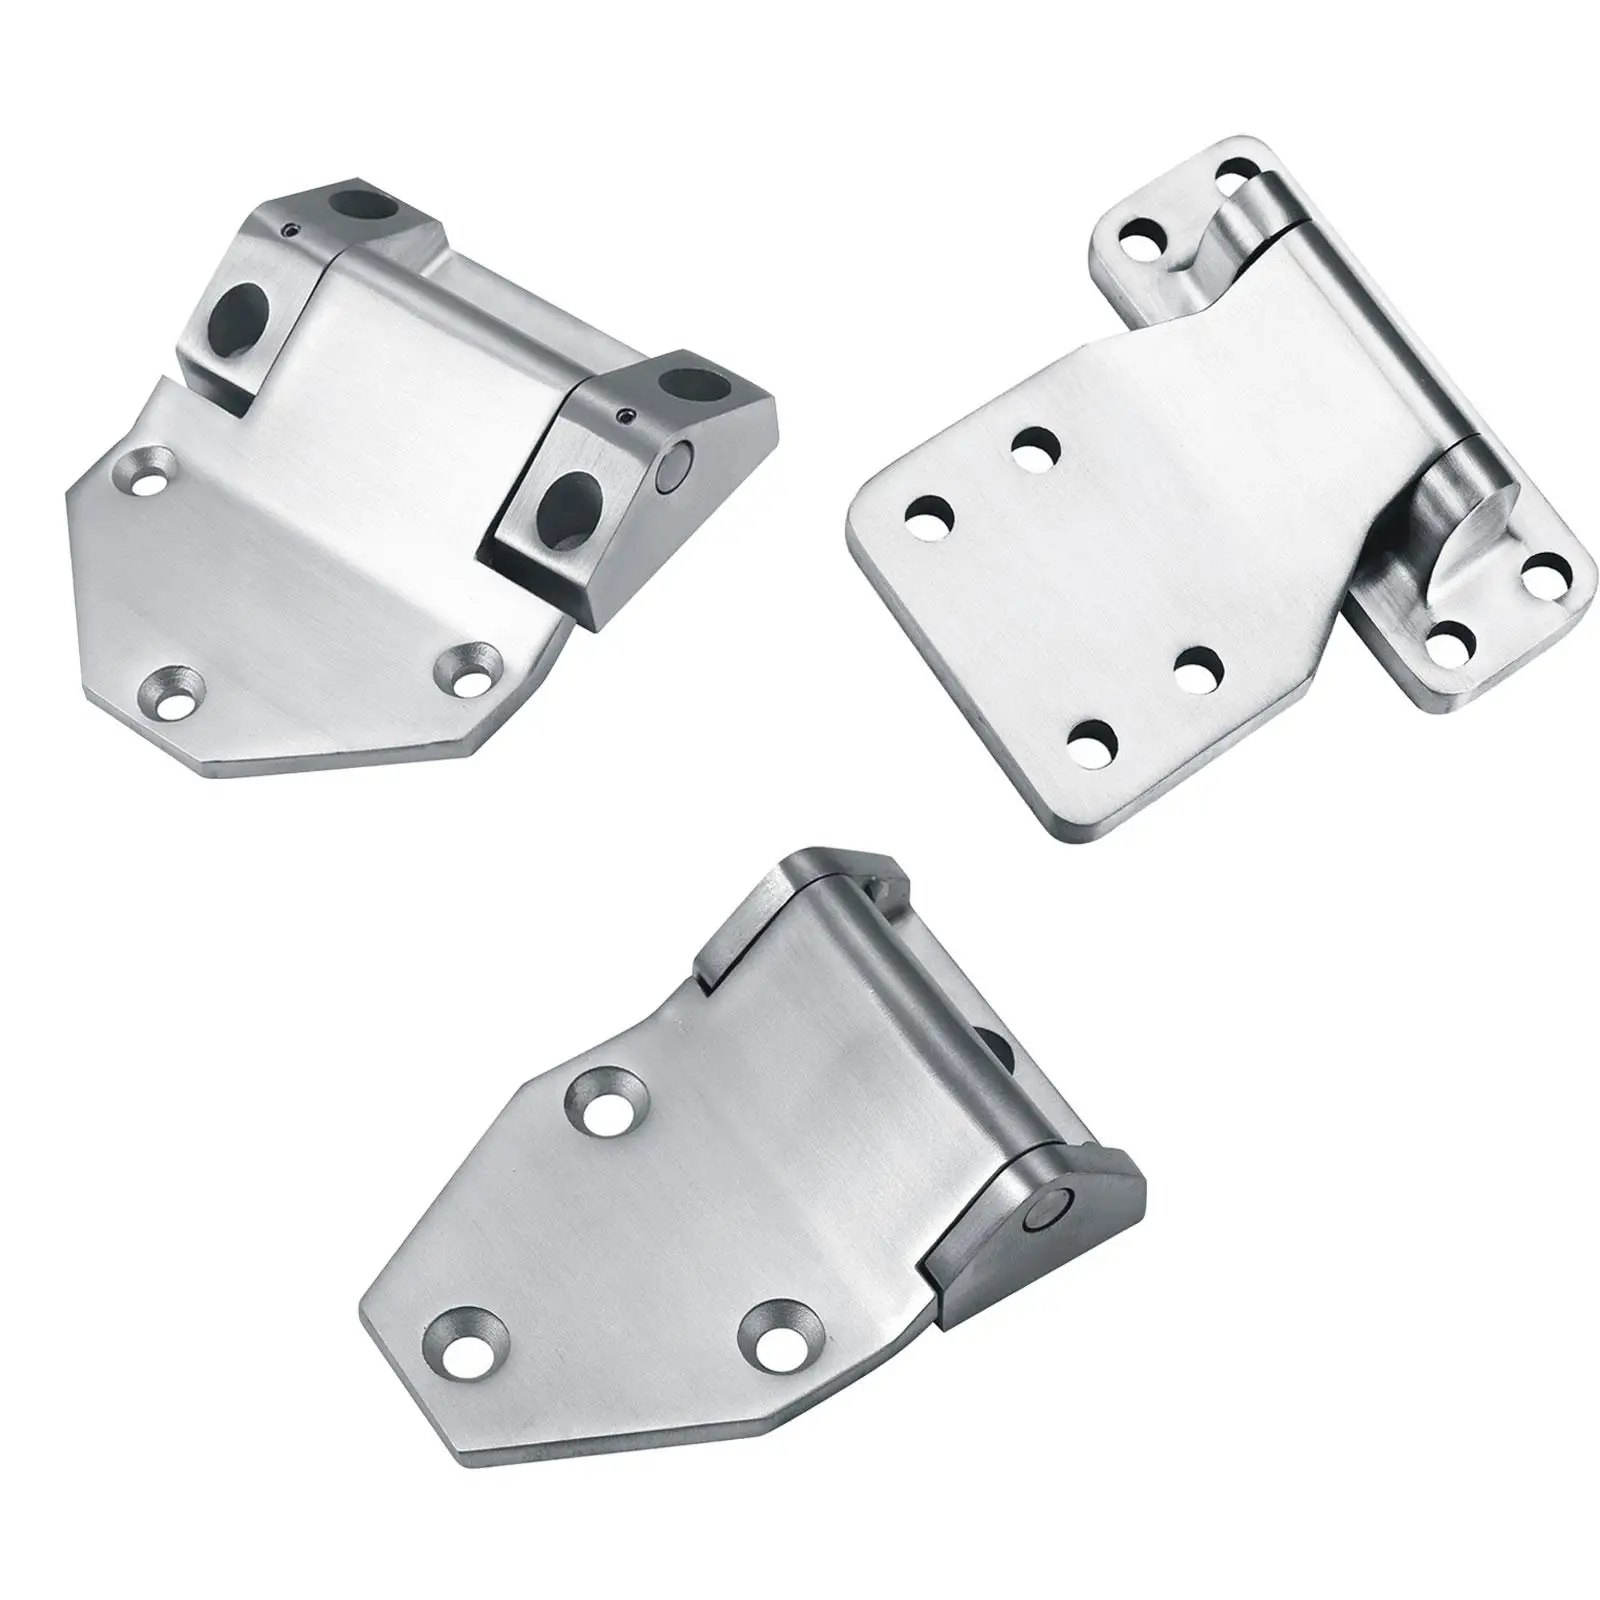 Stainless Steel Door Hinges Hardware Accessories Easy to Install Gate Hinge Shed Hinges for Door Truck Container Drawer Barn RV